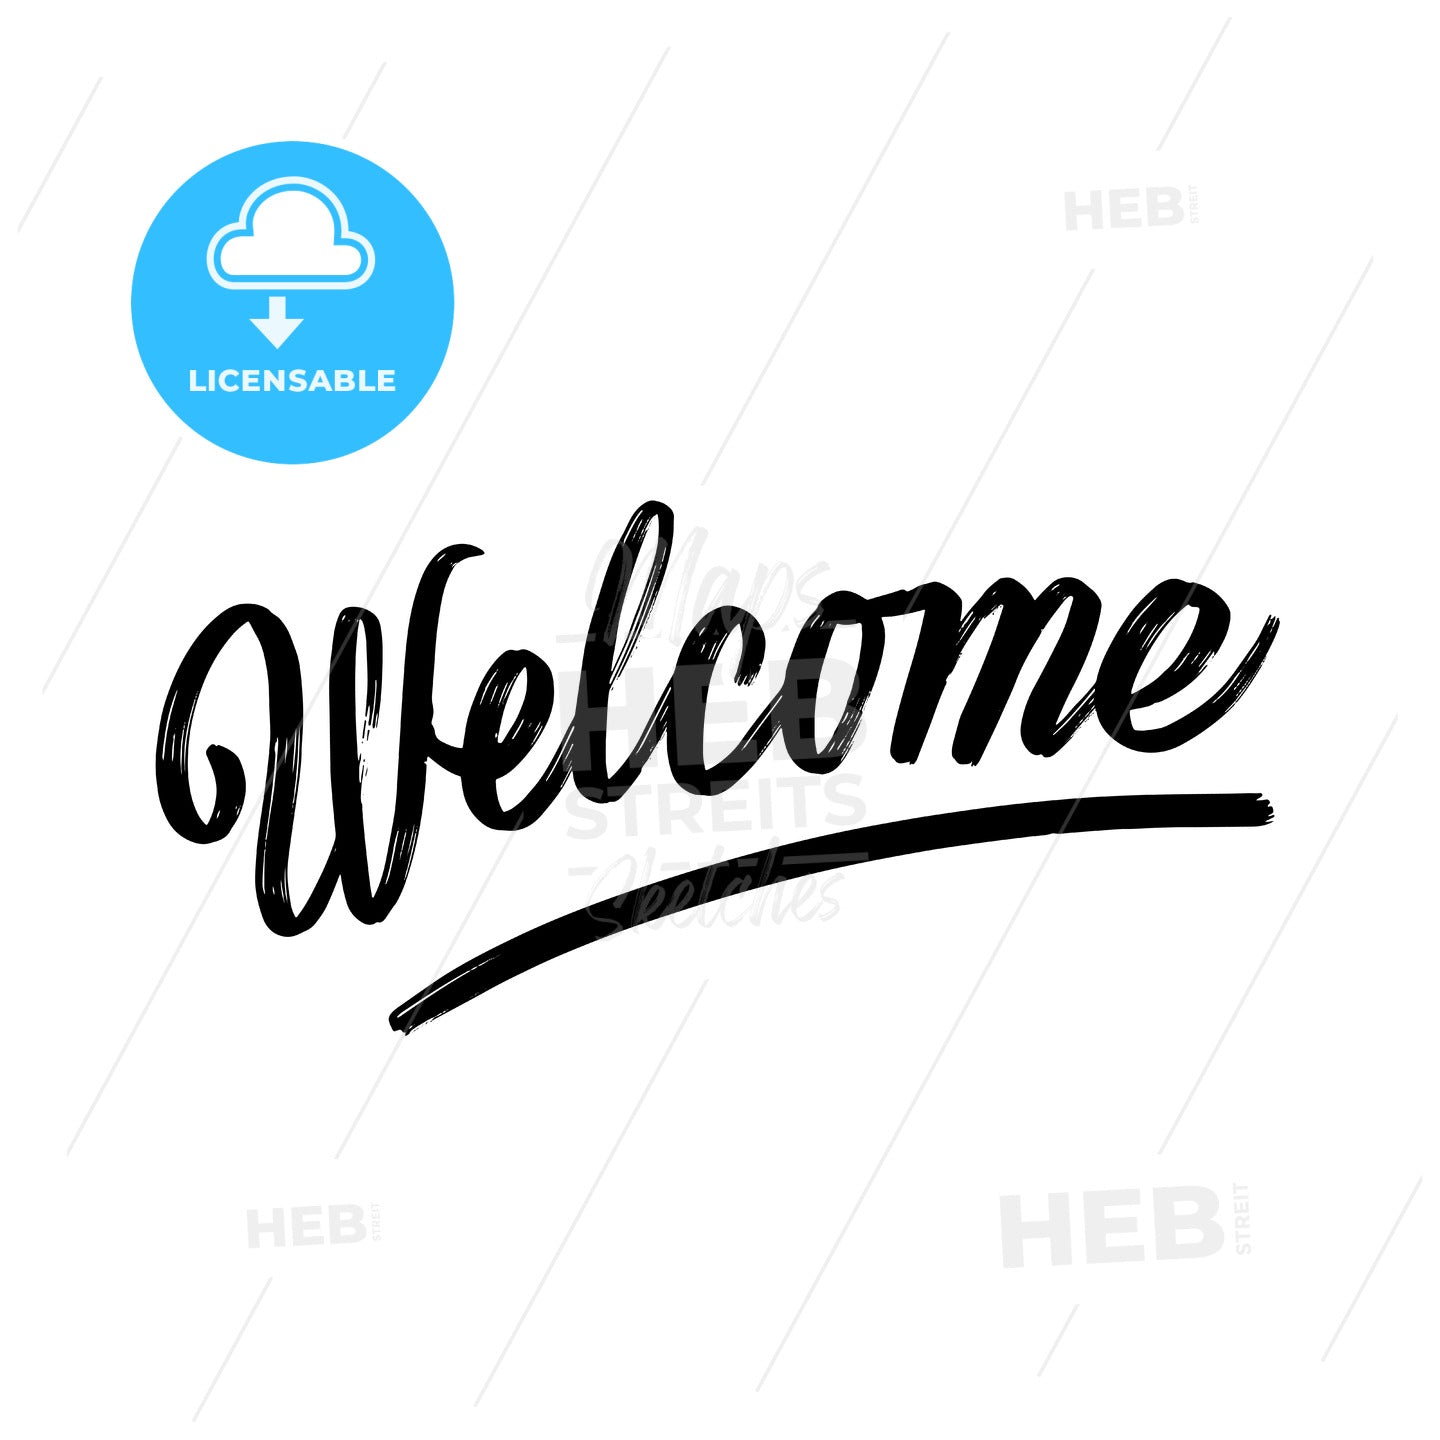 Welcome written phrase, lettering by hand. – instant download